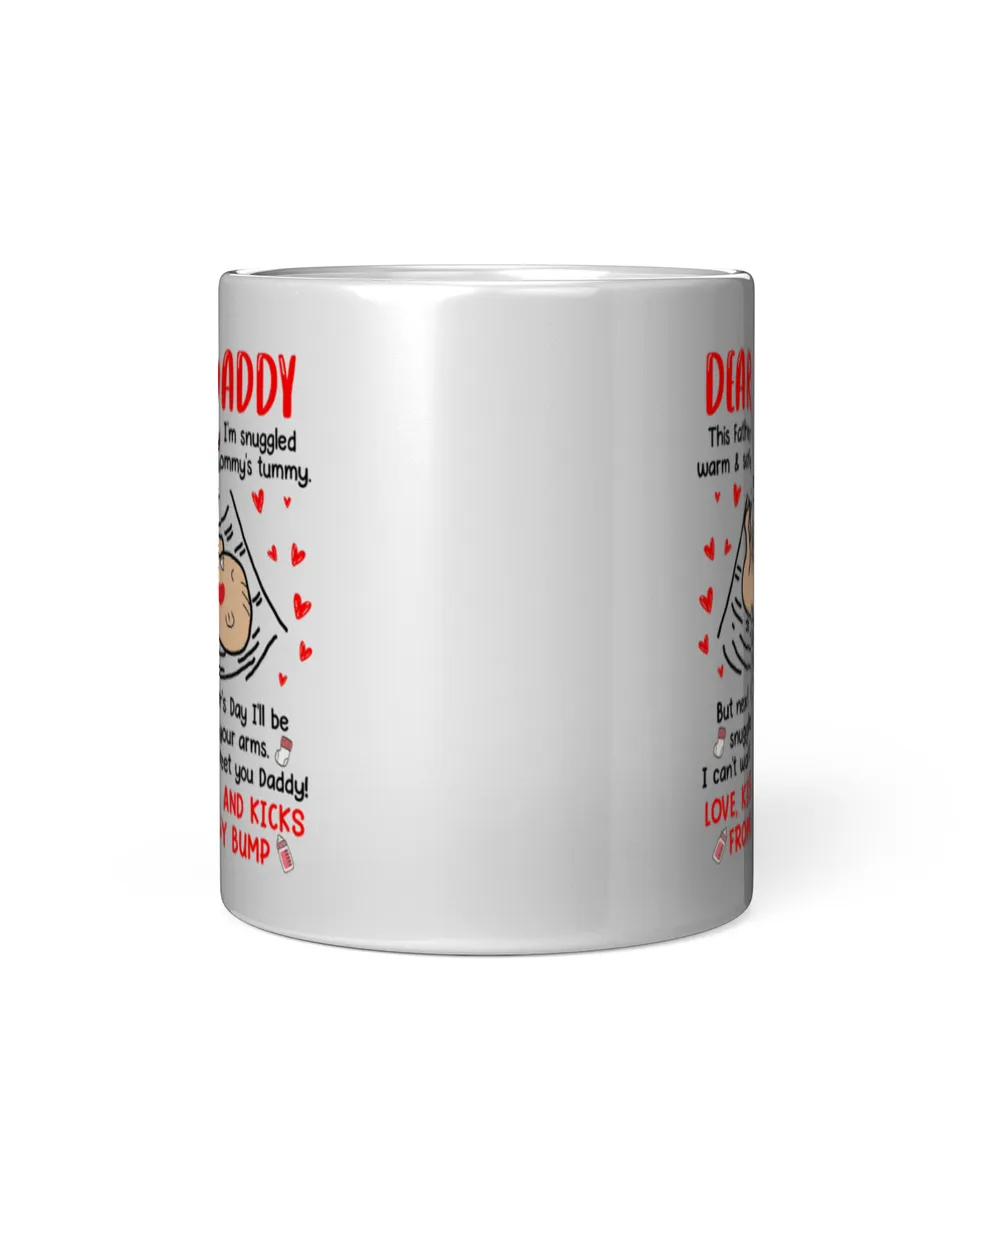 Dear Daddy I Can't Wait To Meet You Father's Day Mug